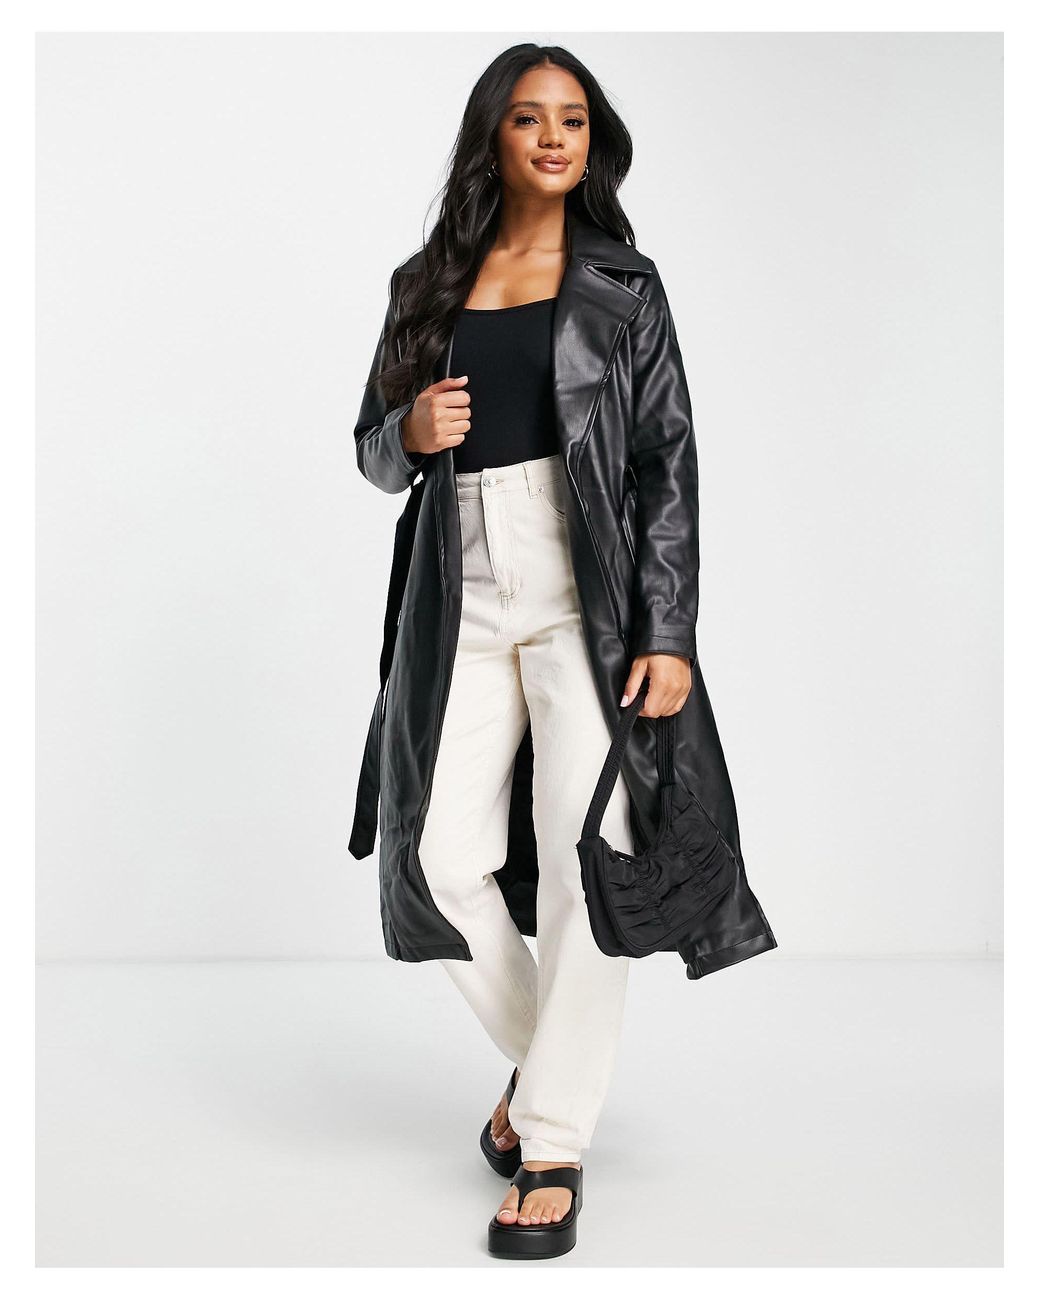 Missguided Women's Black Faux Leather Trench Coat